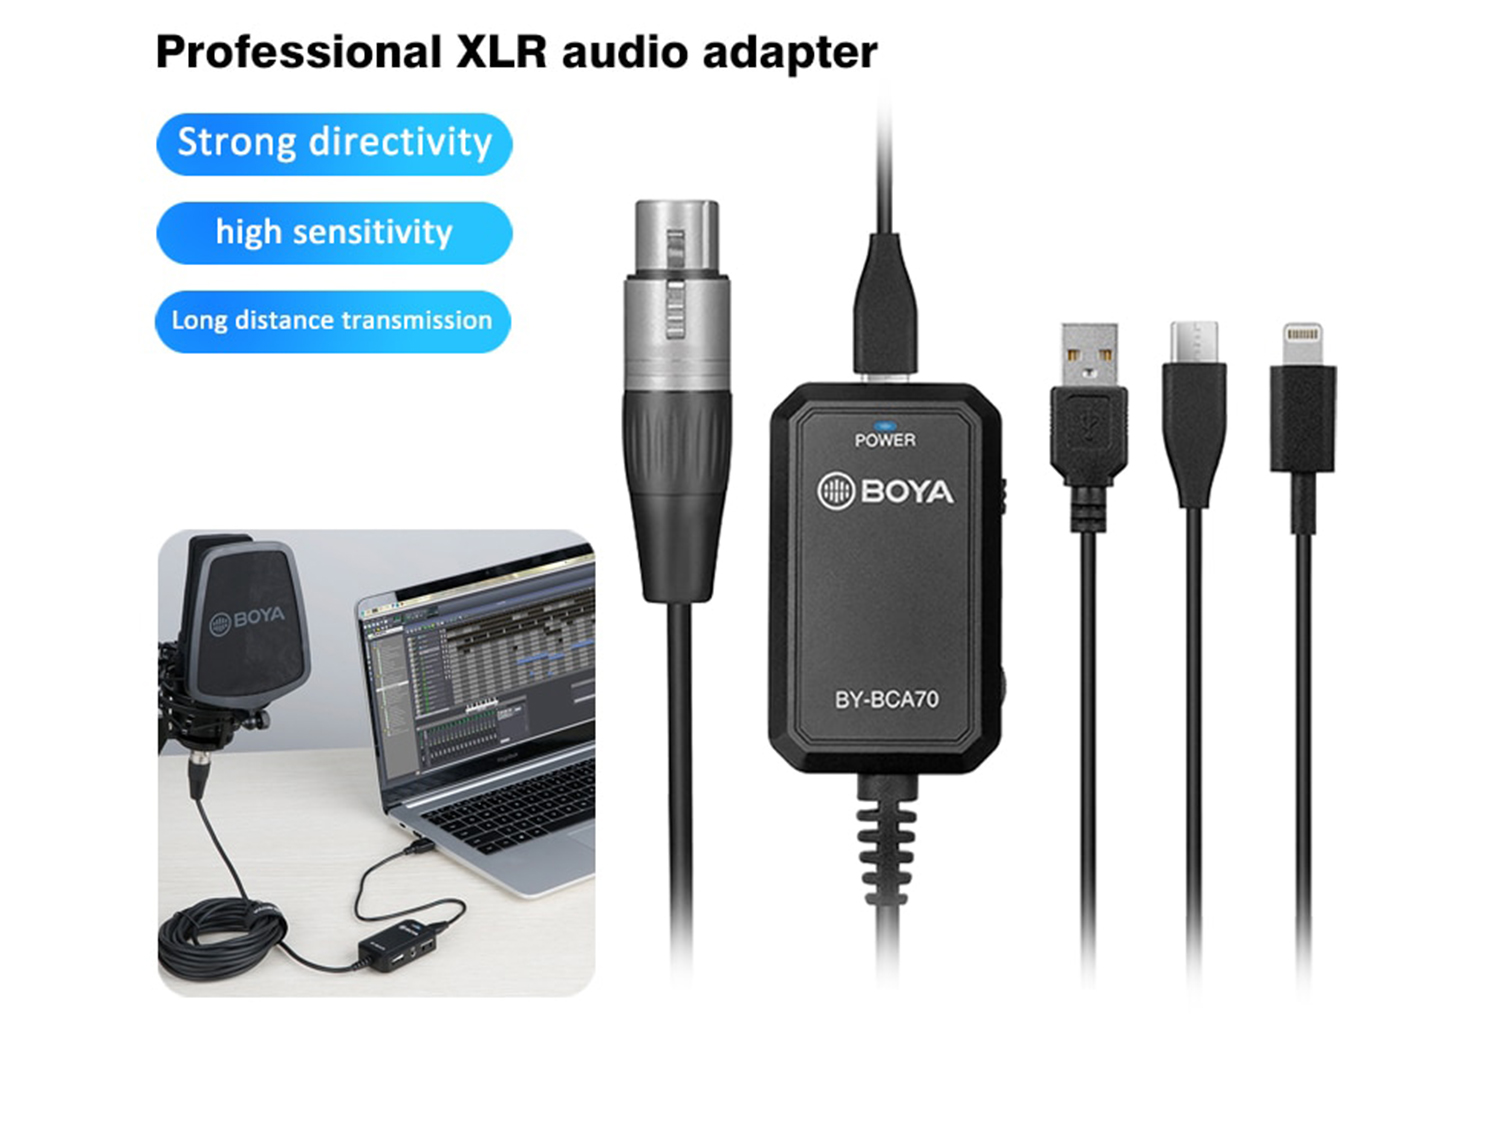 Boya's BY-BCA70 is a professional XLR audio adapter which is specially designed for increasing the convenient flexibility of your XLR microphone to most mobile devices.